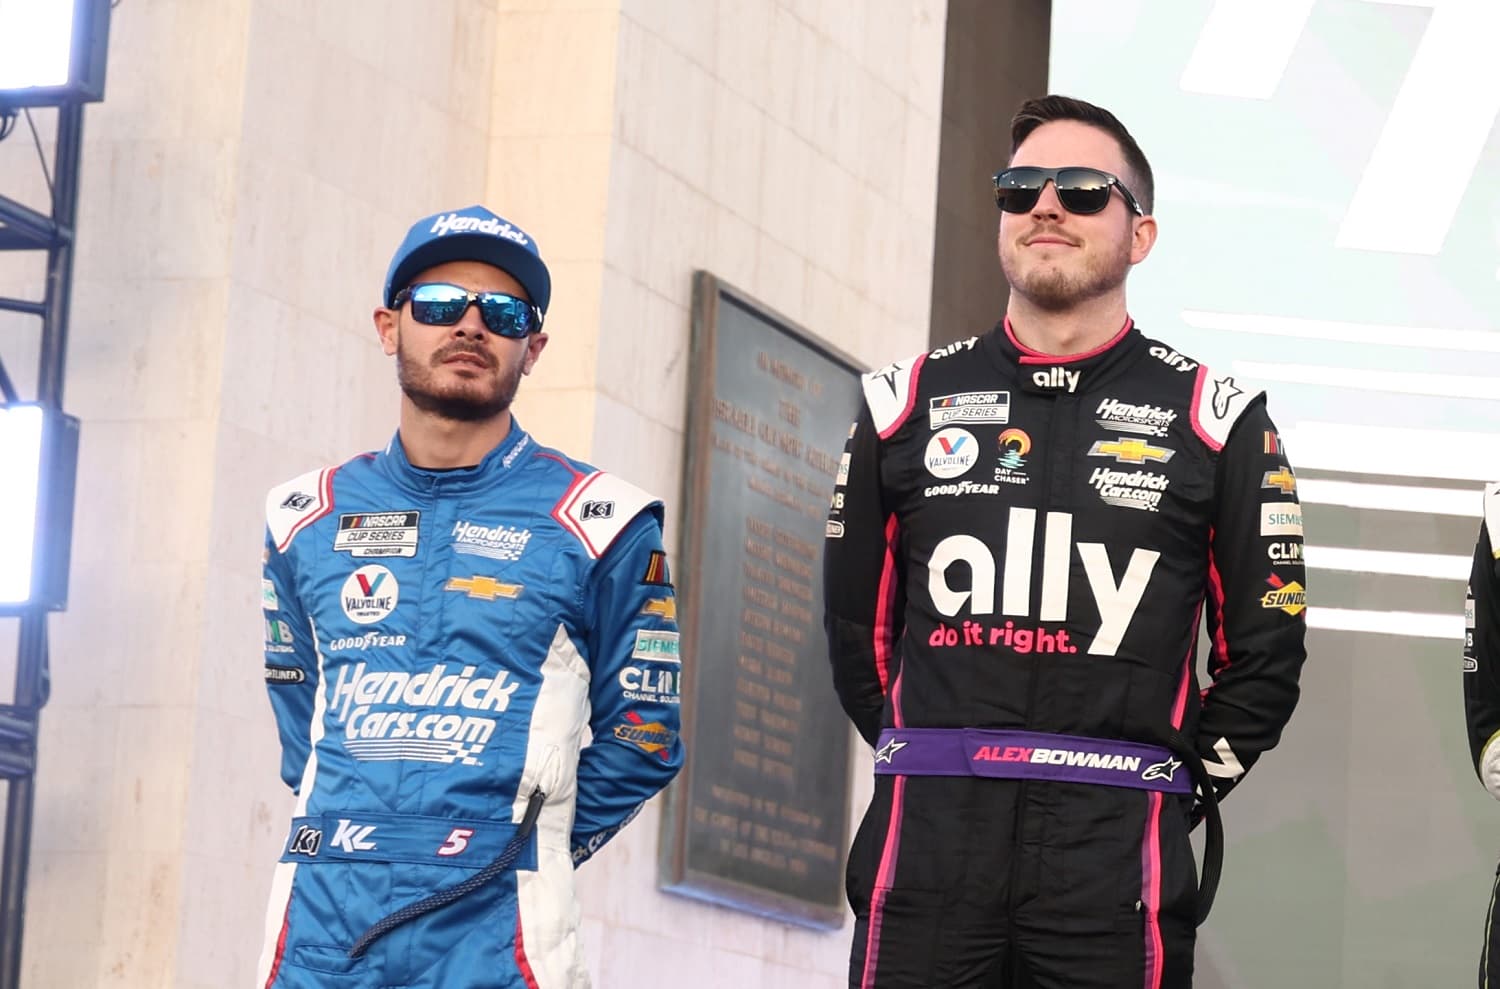 Hendrick Motorsports drivers Kyle Larson and Alex Bowman during ceremonies before the Busch Light Clash at the Los Angeles Coliseum on Feb. 5, 2023. | Joe Scarnici/Getty Images